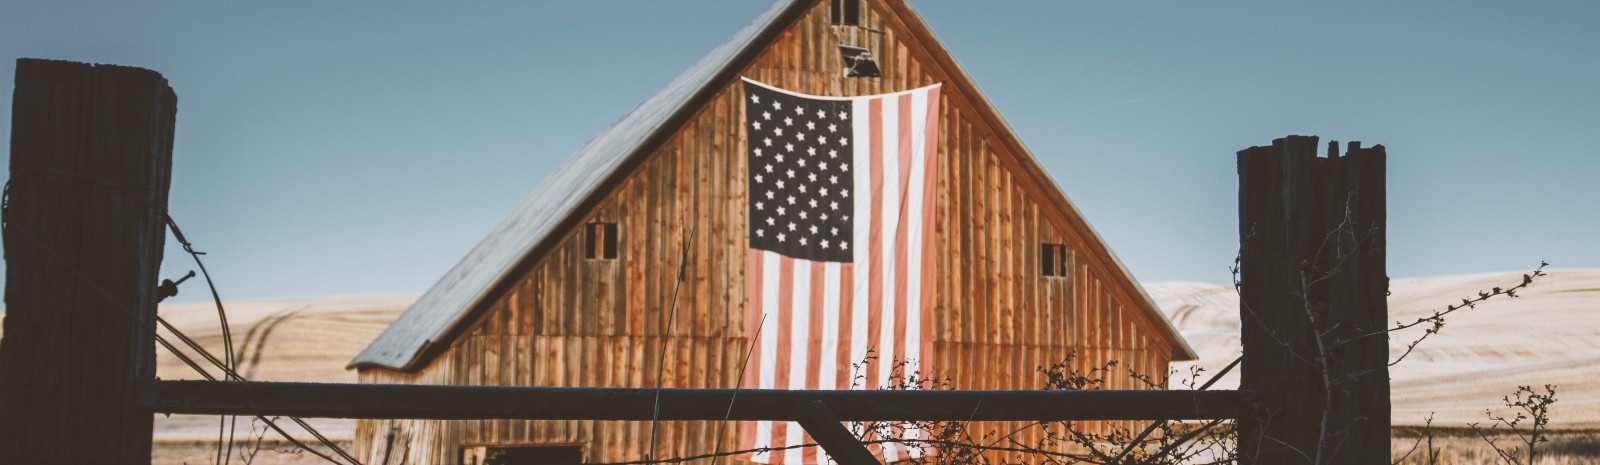 Barn with flag draped over it